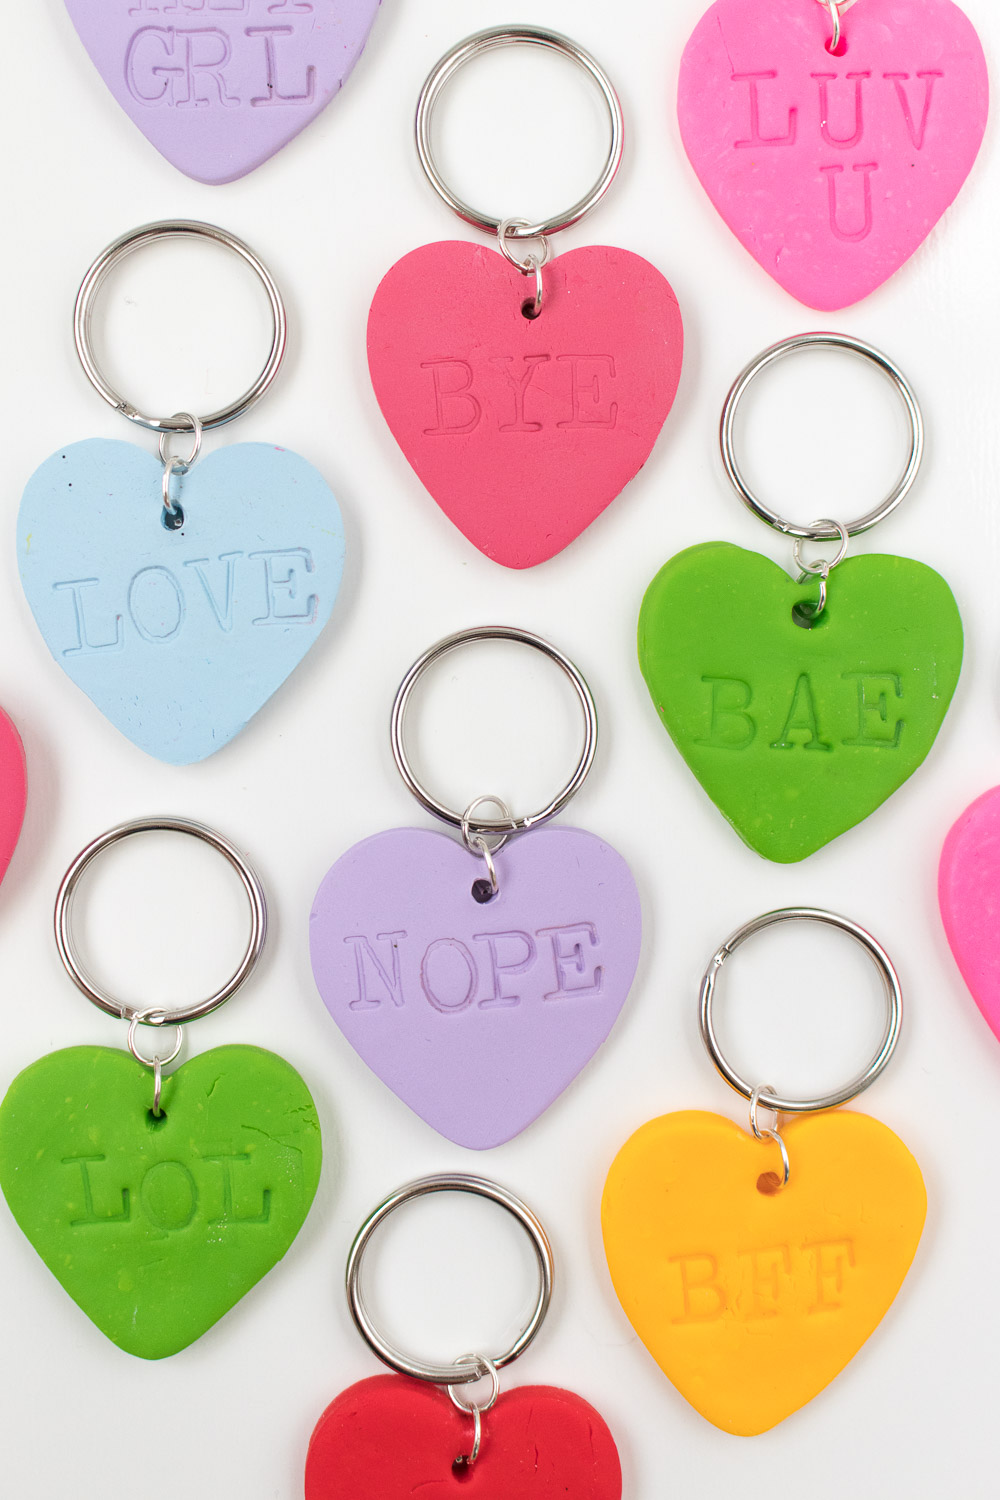 Details about   Key Holder Key Chain Letter Printed Ornaments Craft Creative Unisex Heart Shape 